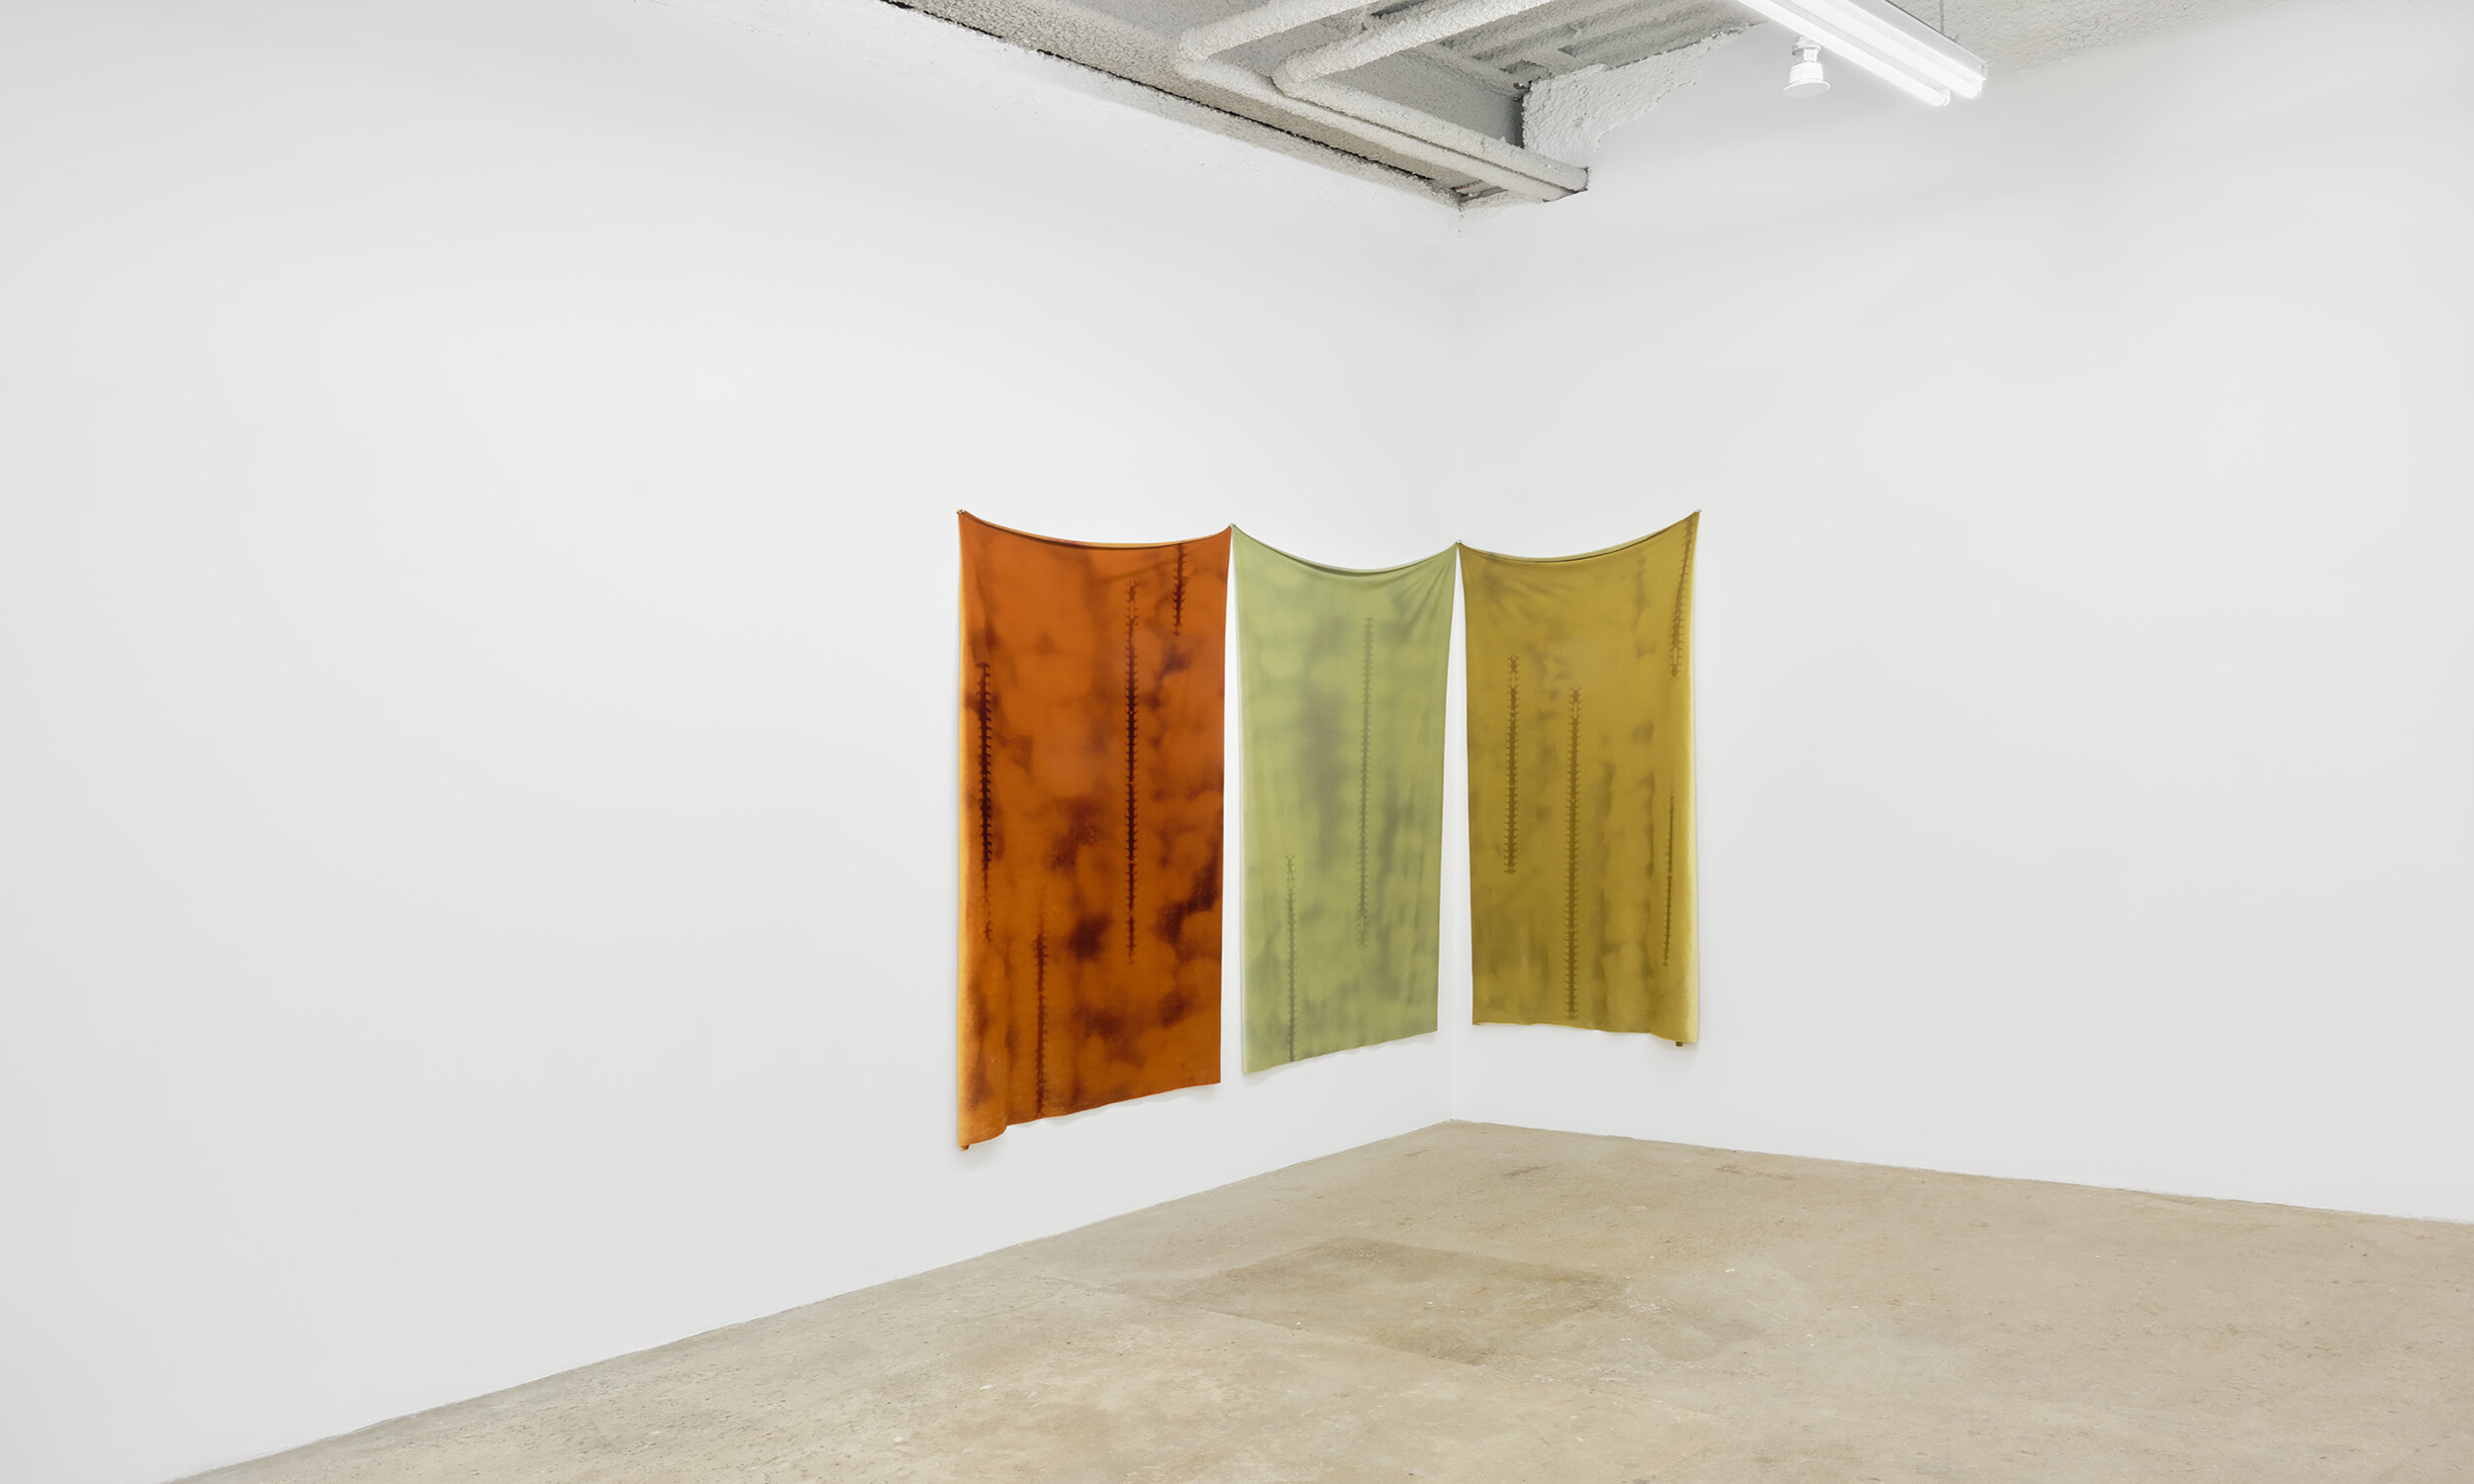  Vladislav Markov (left to right)  Burnout (with where my car is at) , 2020   Burnout (4,12) , 2020  Burnout (ETA ten minutes) , 2020 chemical fiber etching on velour  approximately 68 x 44 inches (173 x 112 cm) each panel 